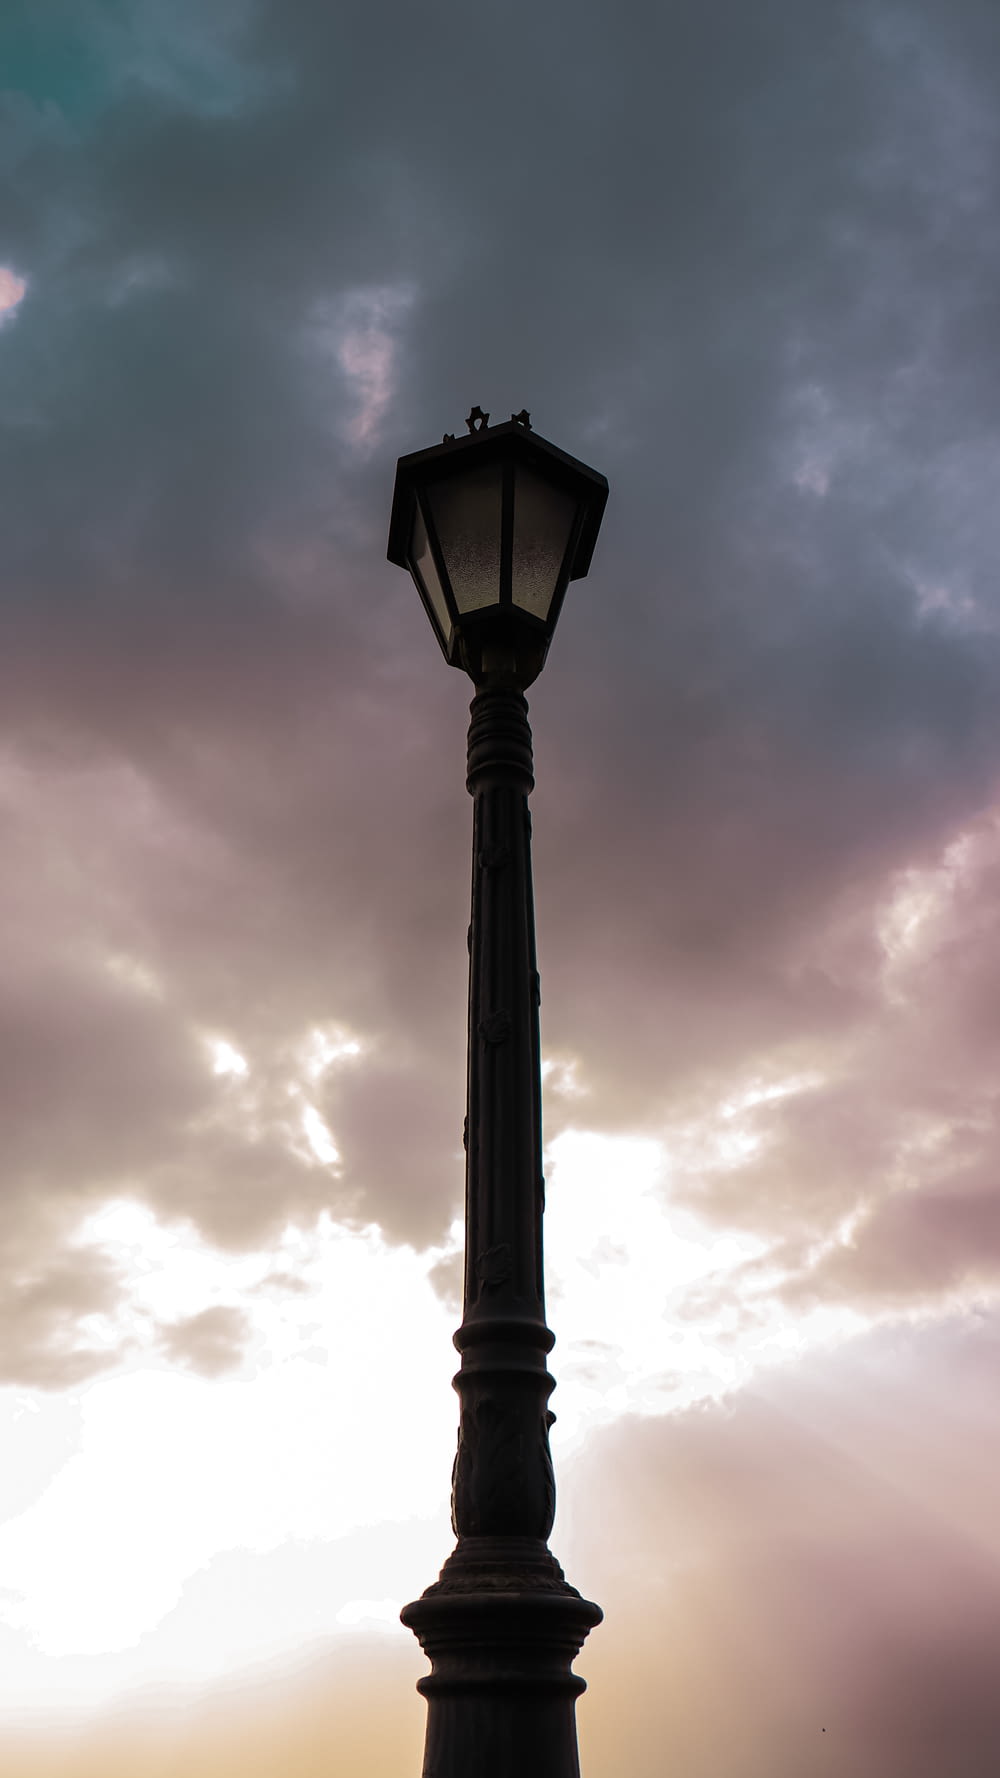 a lamp post with a cloudy sky in the background